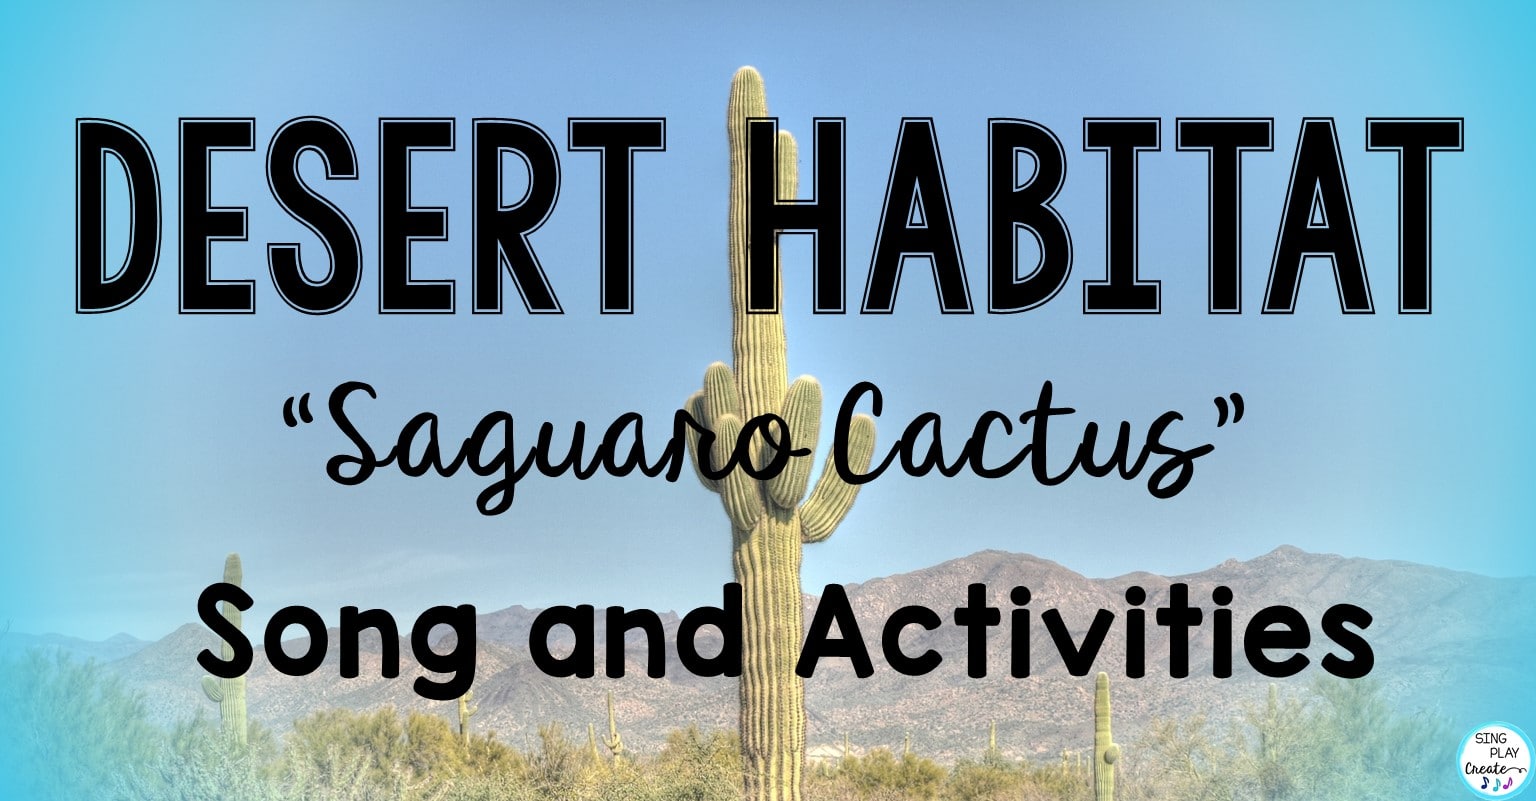 You are currently viewing Desert Habitat Educational Song “Saguaro Cactus”